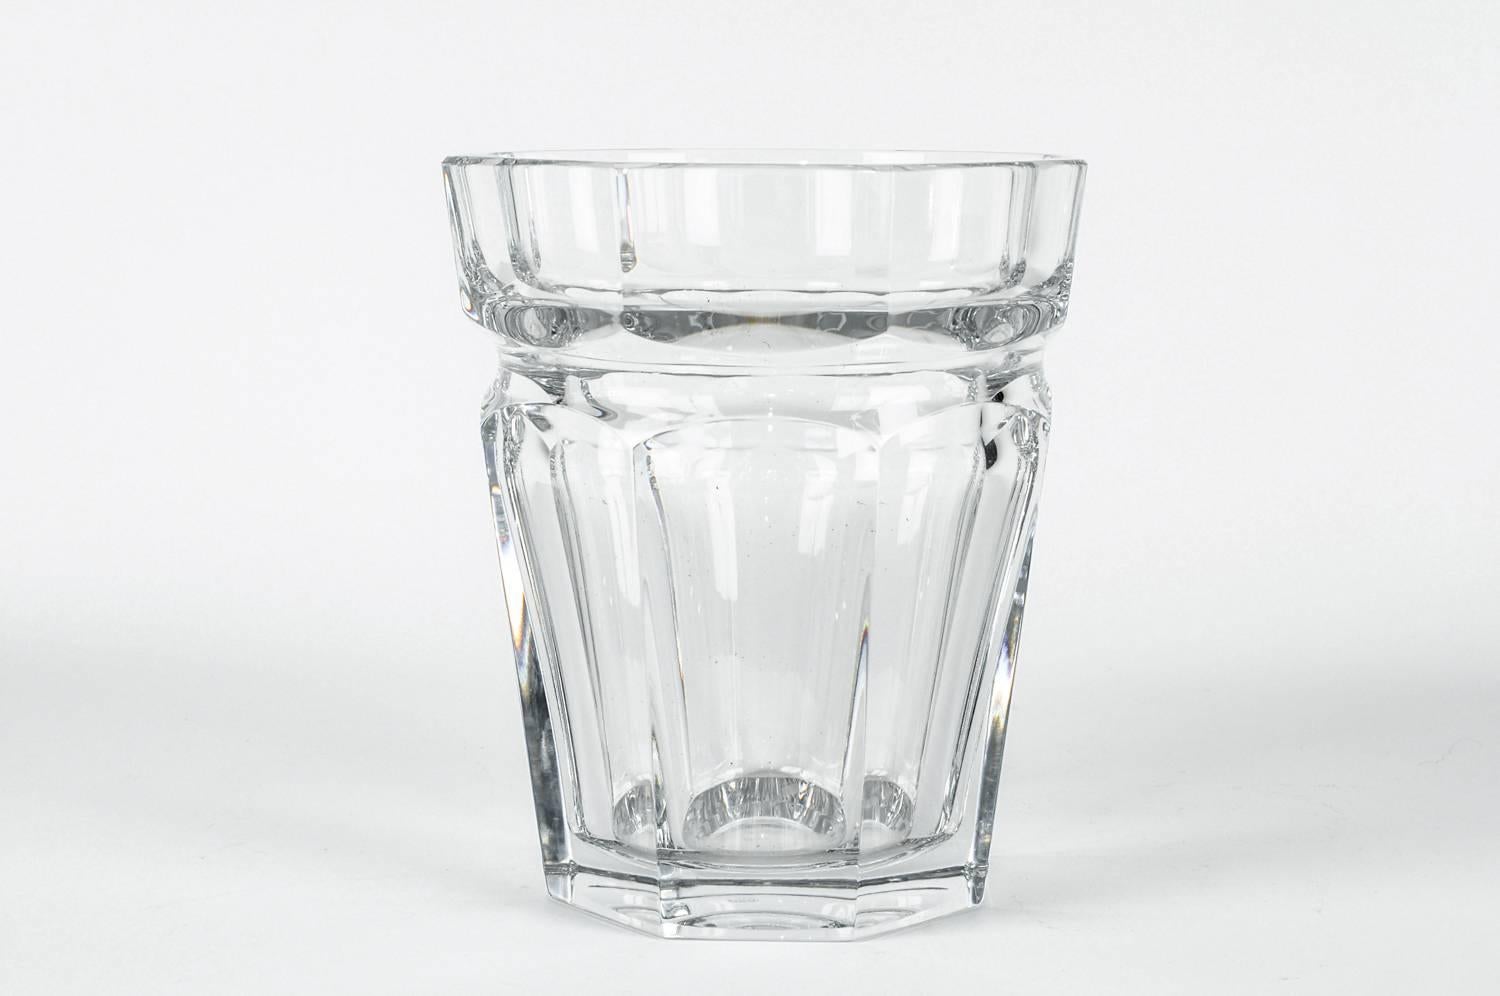 Mid-20th century modern Art Deco style Baccarat crystal ice bucket / champagne cooler. The cooler measure 9